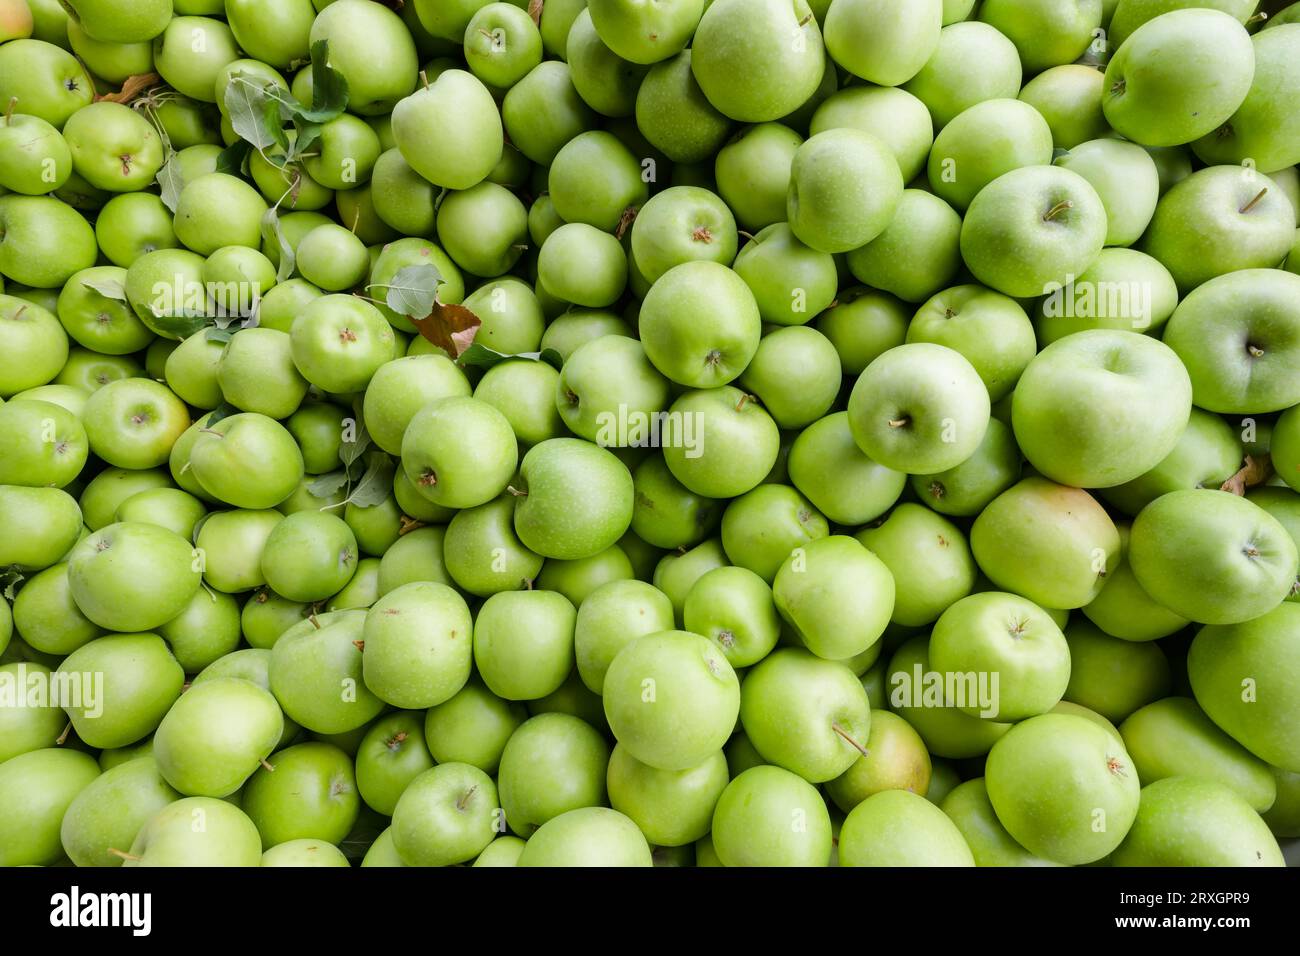 Large collection of green Granny Smith apples during fall harvest with leaves and stalks Stock Photo